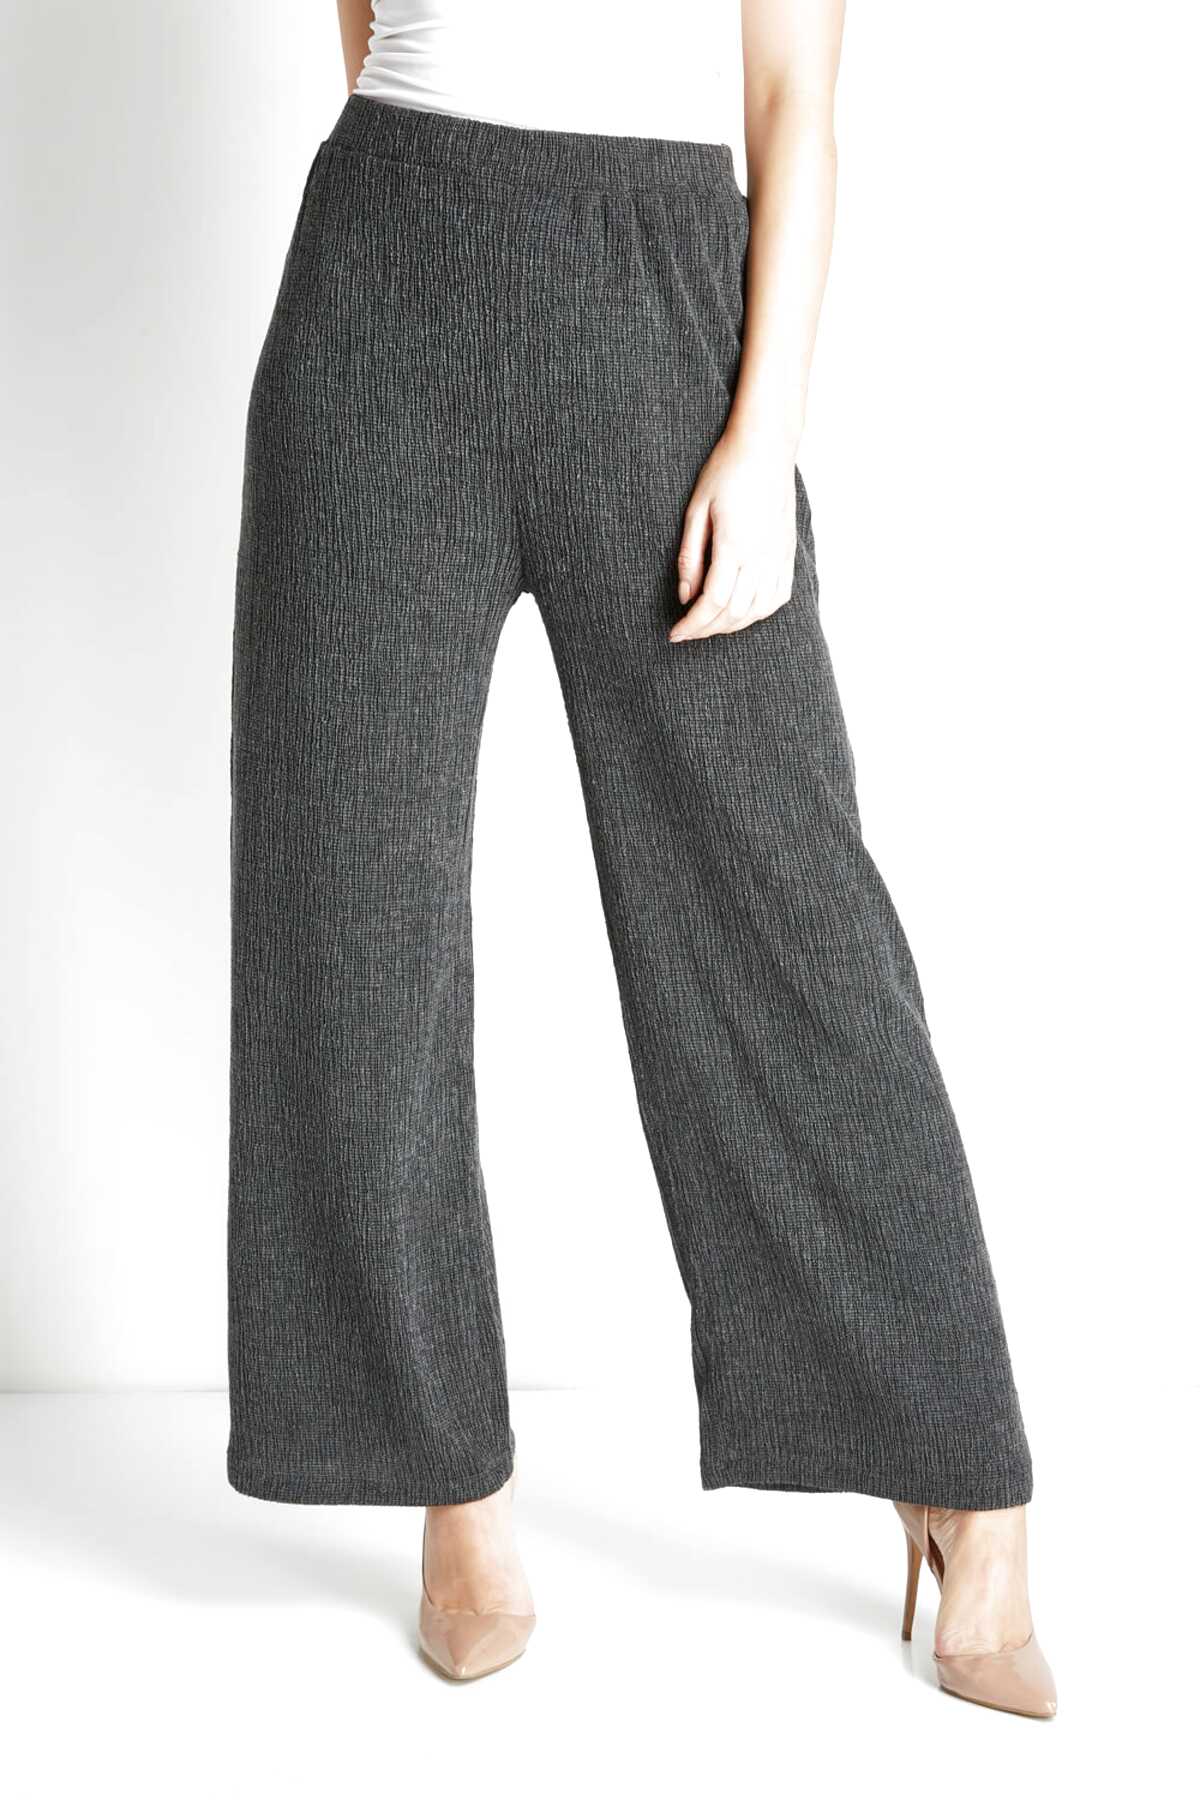 Crinkle Trousers for sale in UK | 66 used Crinkle Trousers